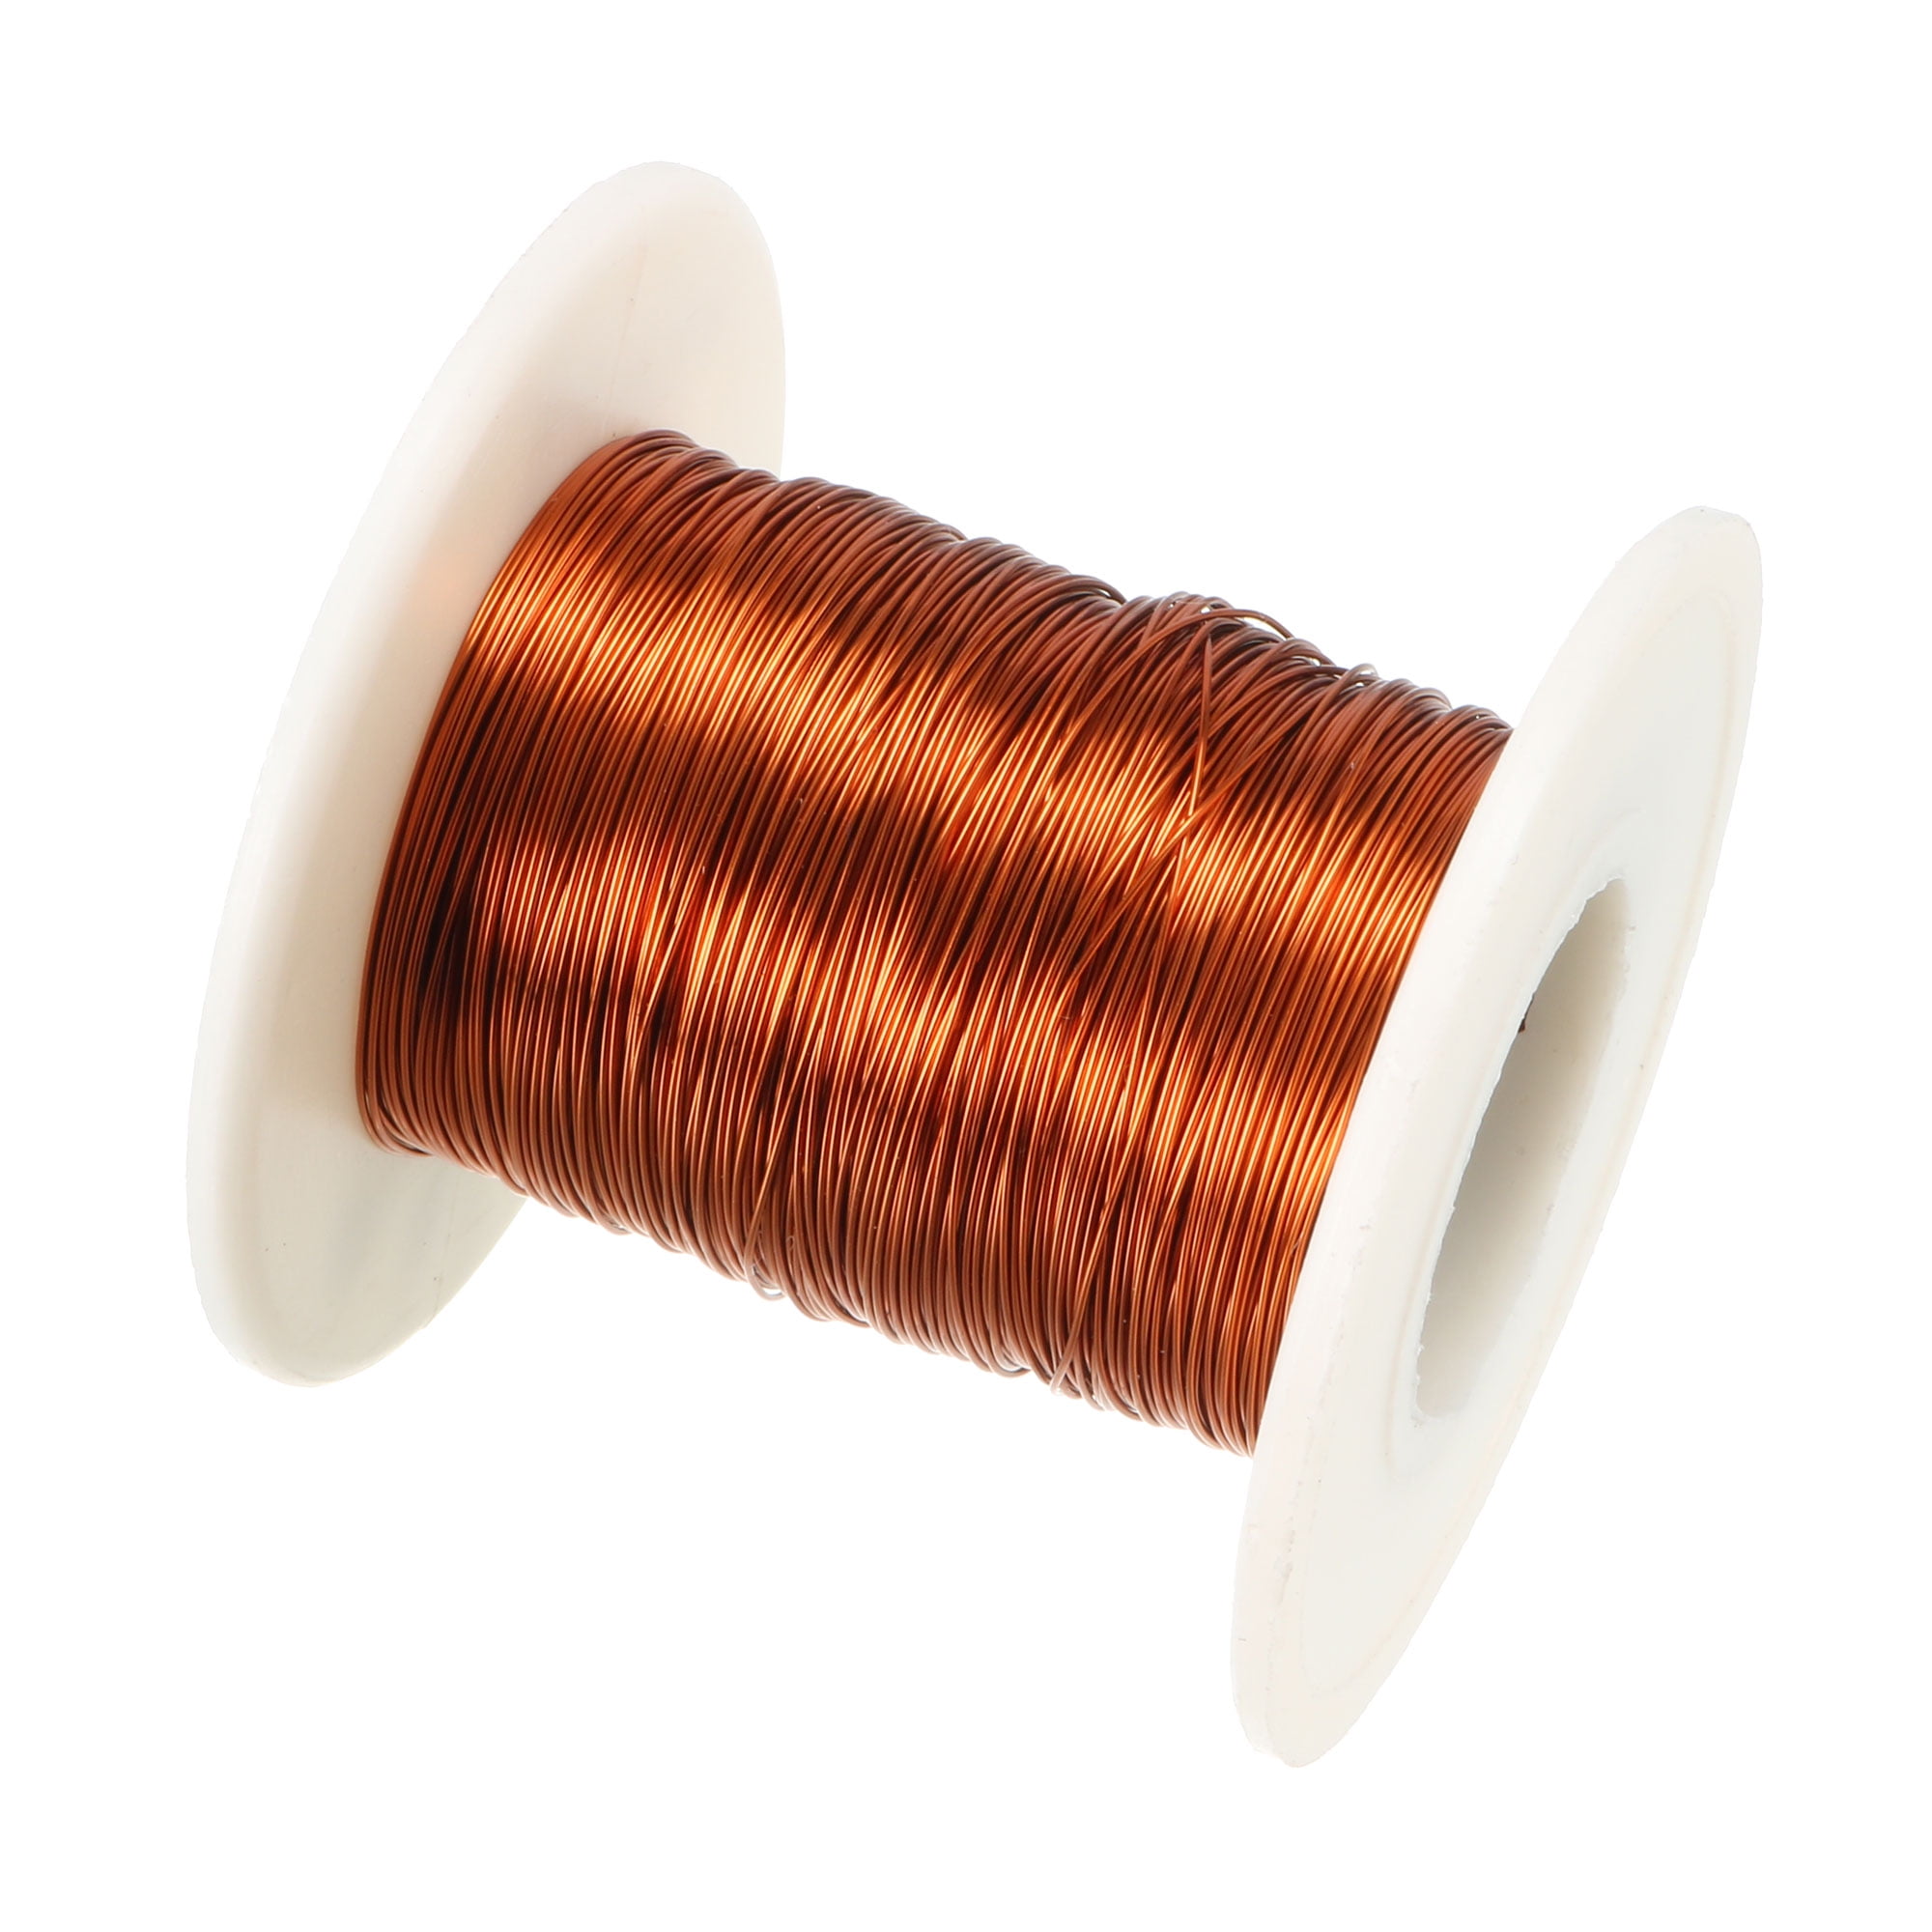 22 AWG Solid Enameled Bare Copper Magnet Wire - 1/4 lb Spool